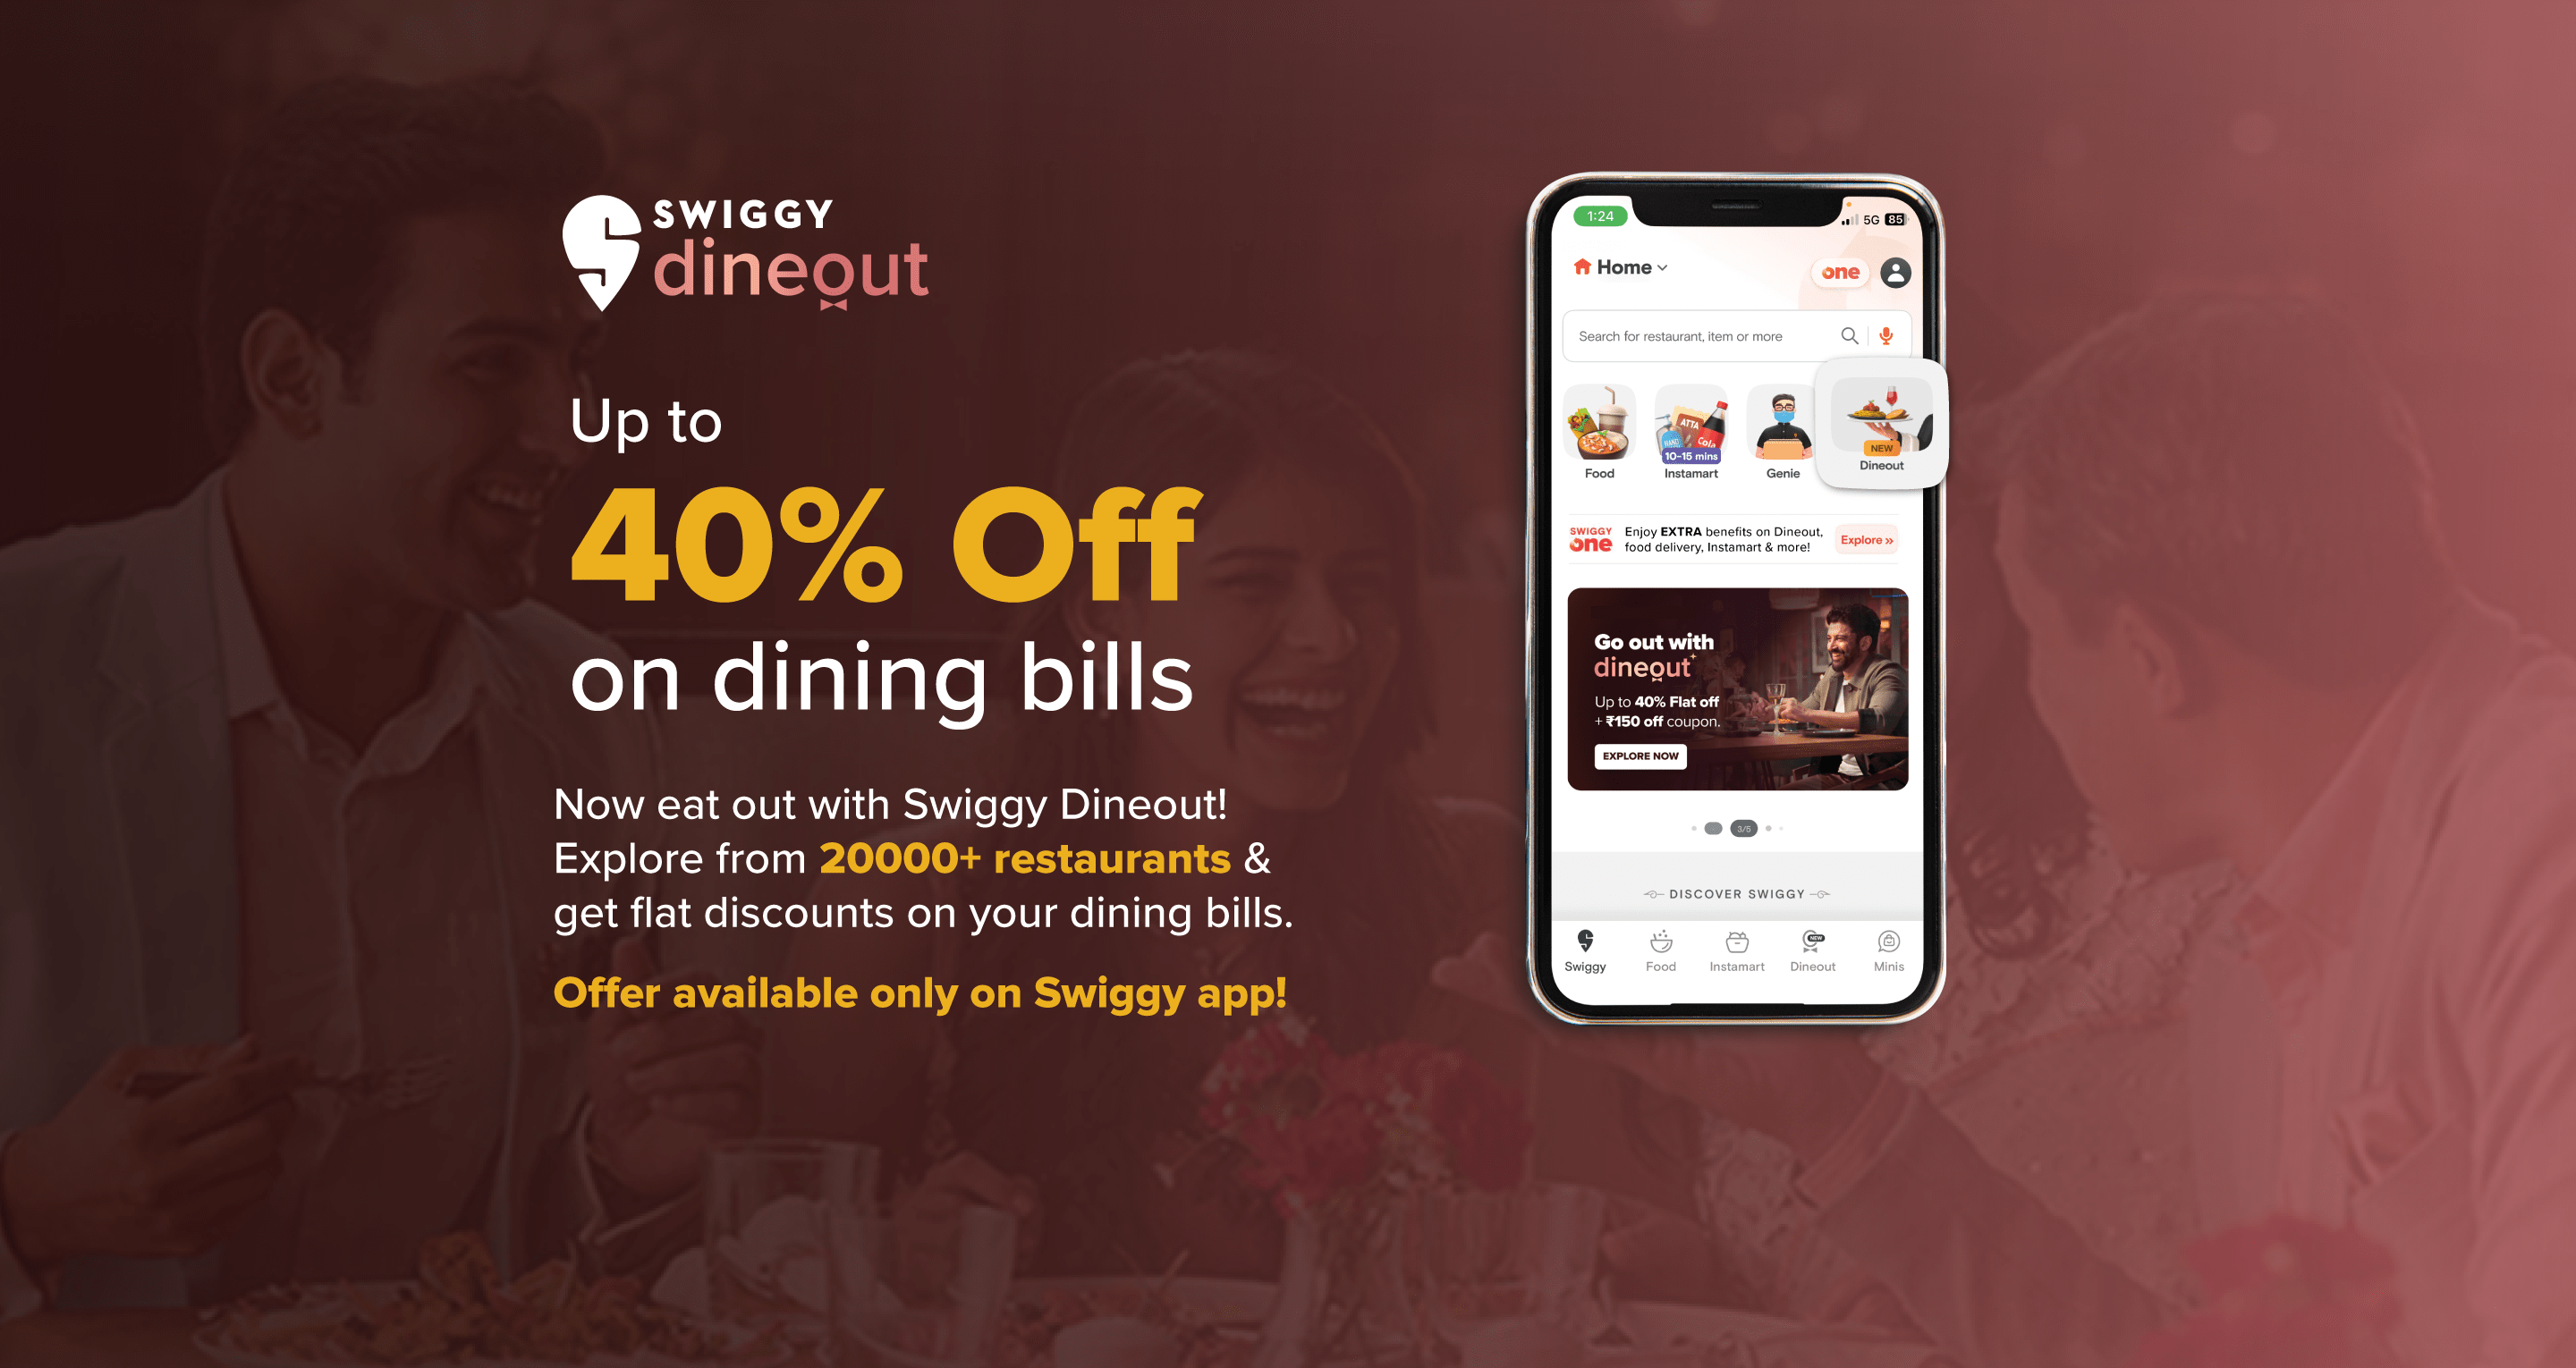 Now go out with Swiggy Dineout! Enjoy FLAT discounts on your dining bills at 18000+ restaurants.